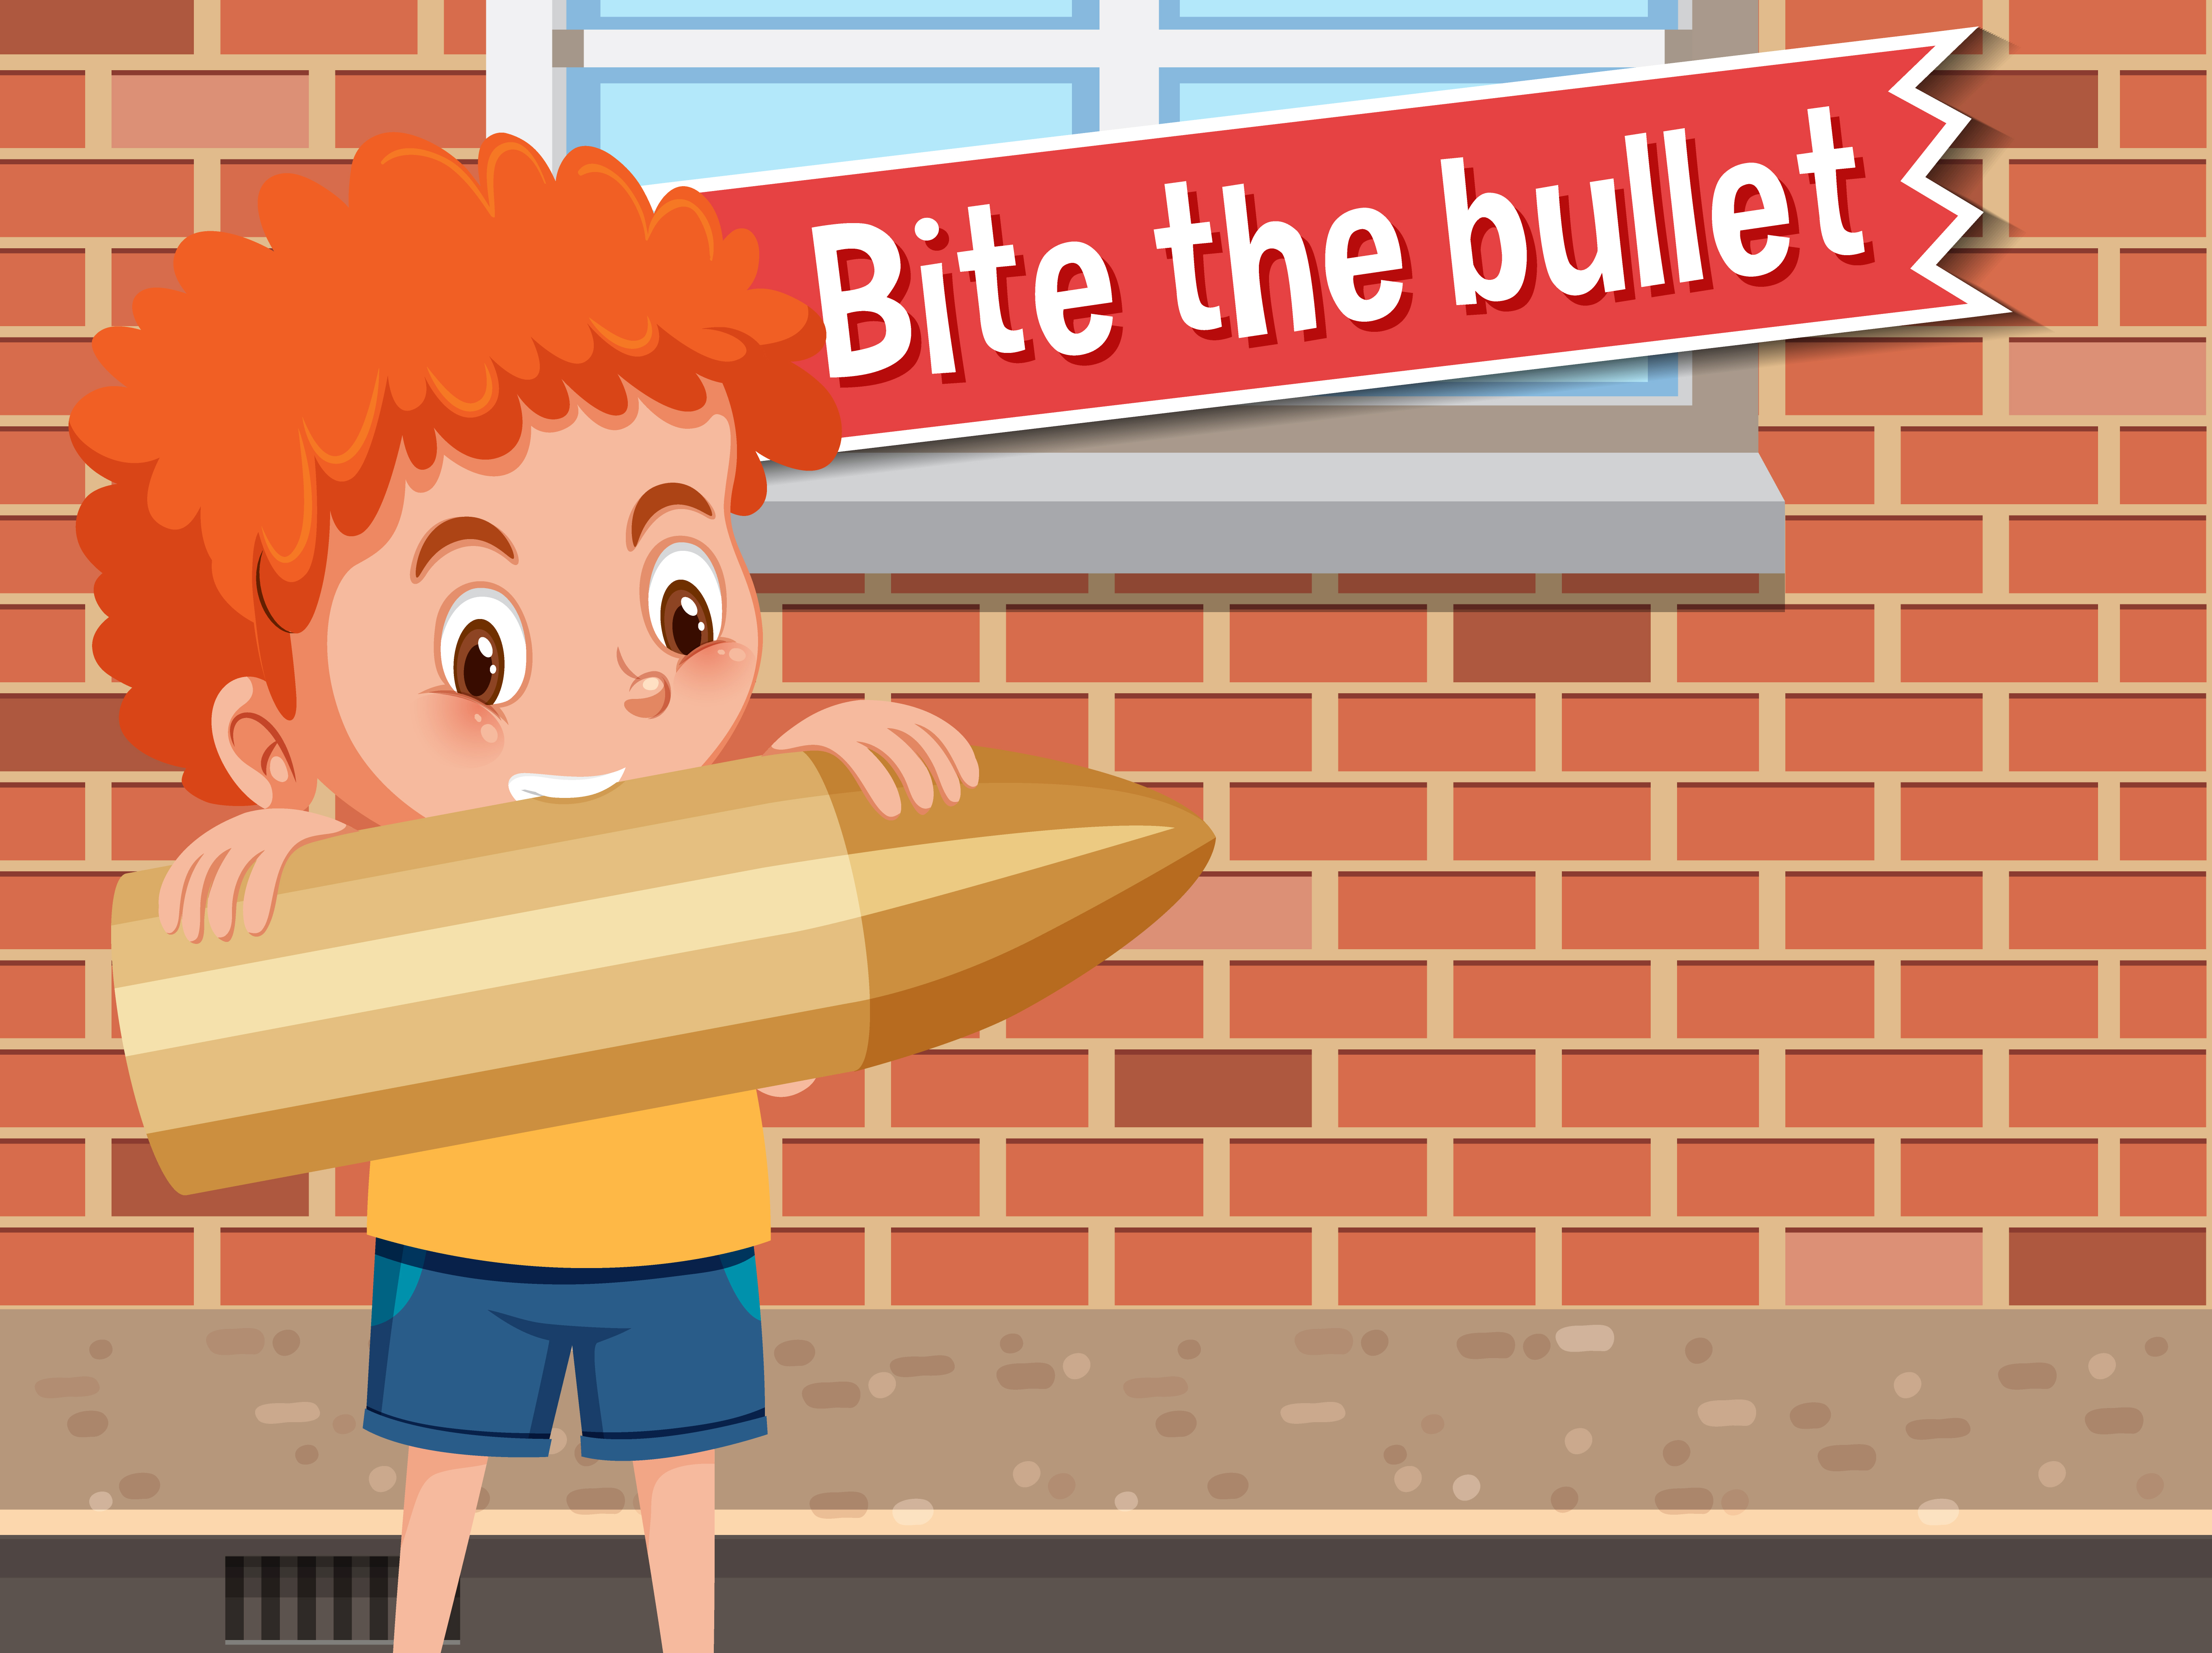 English idioms - Bite the bullet 